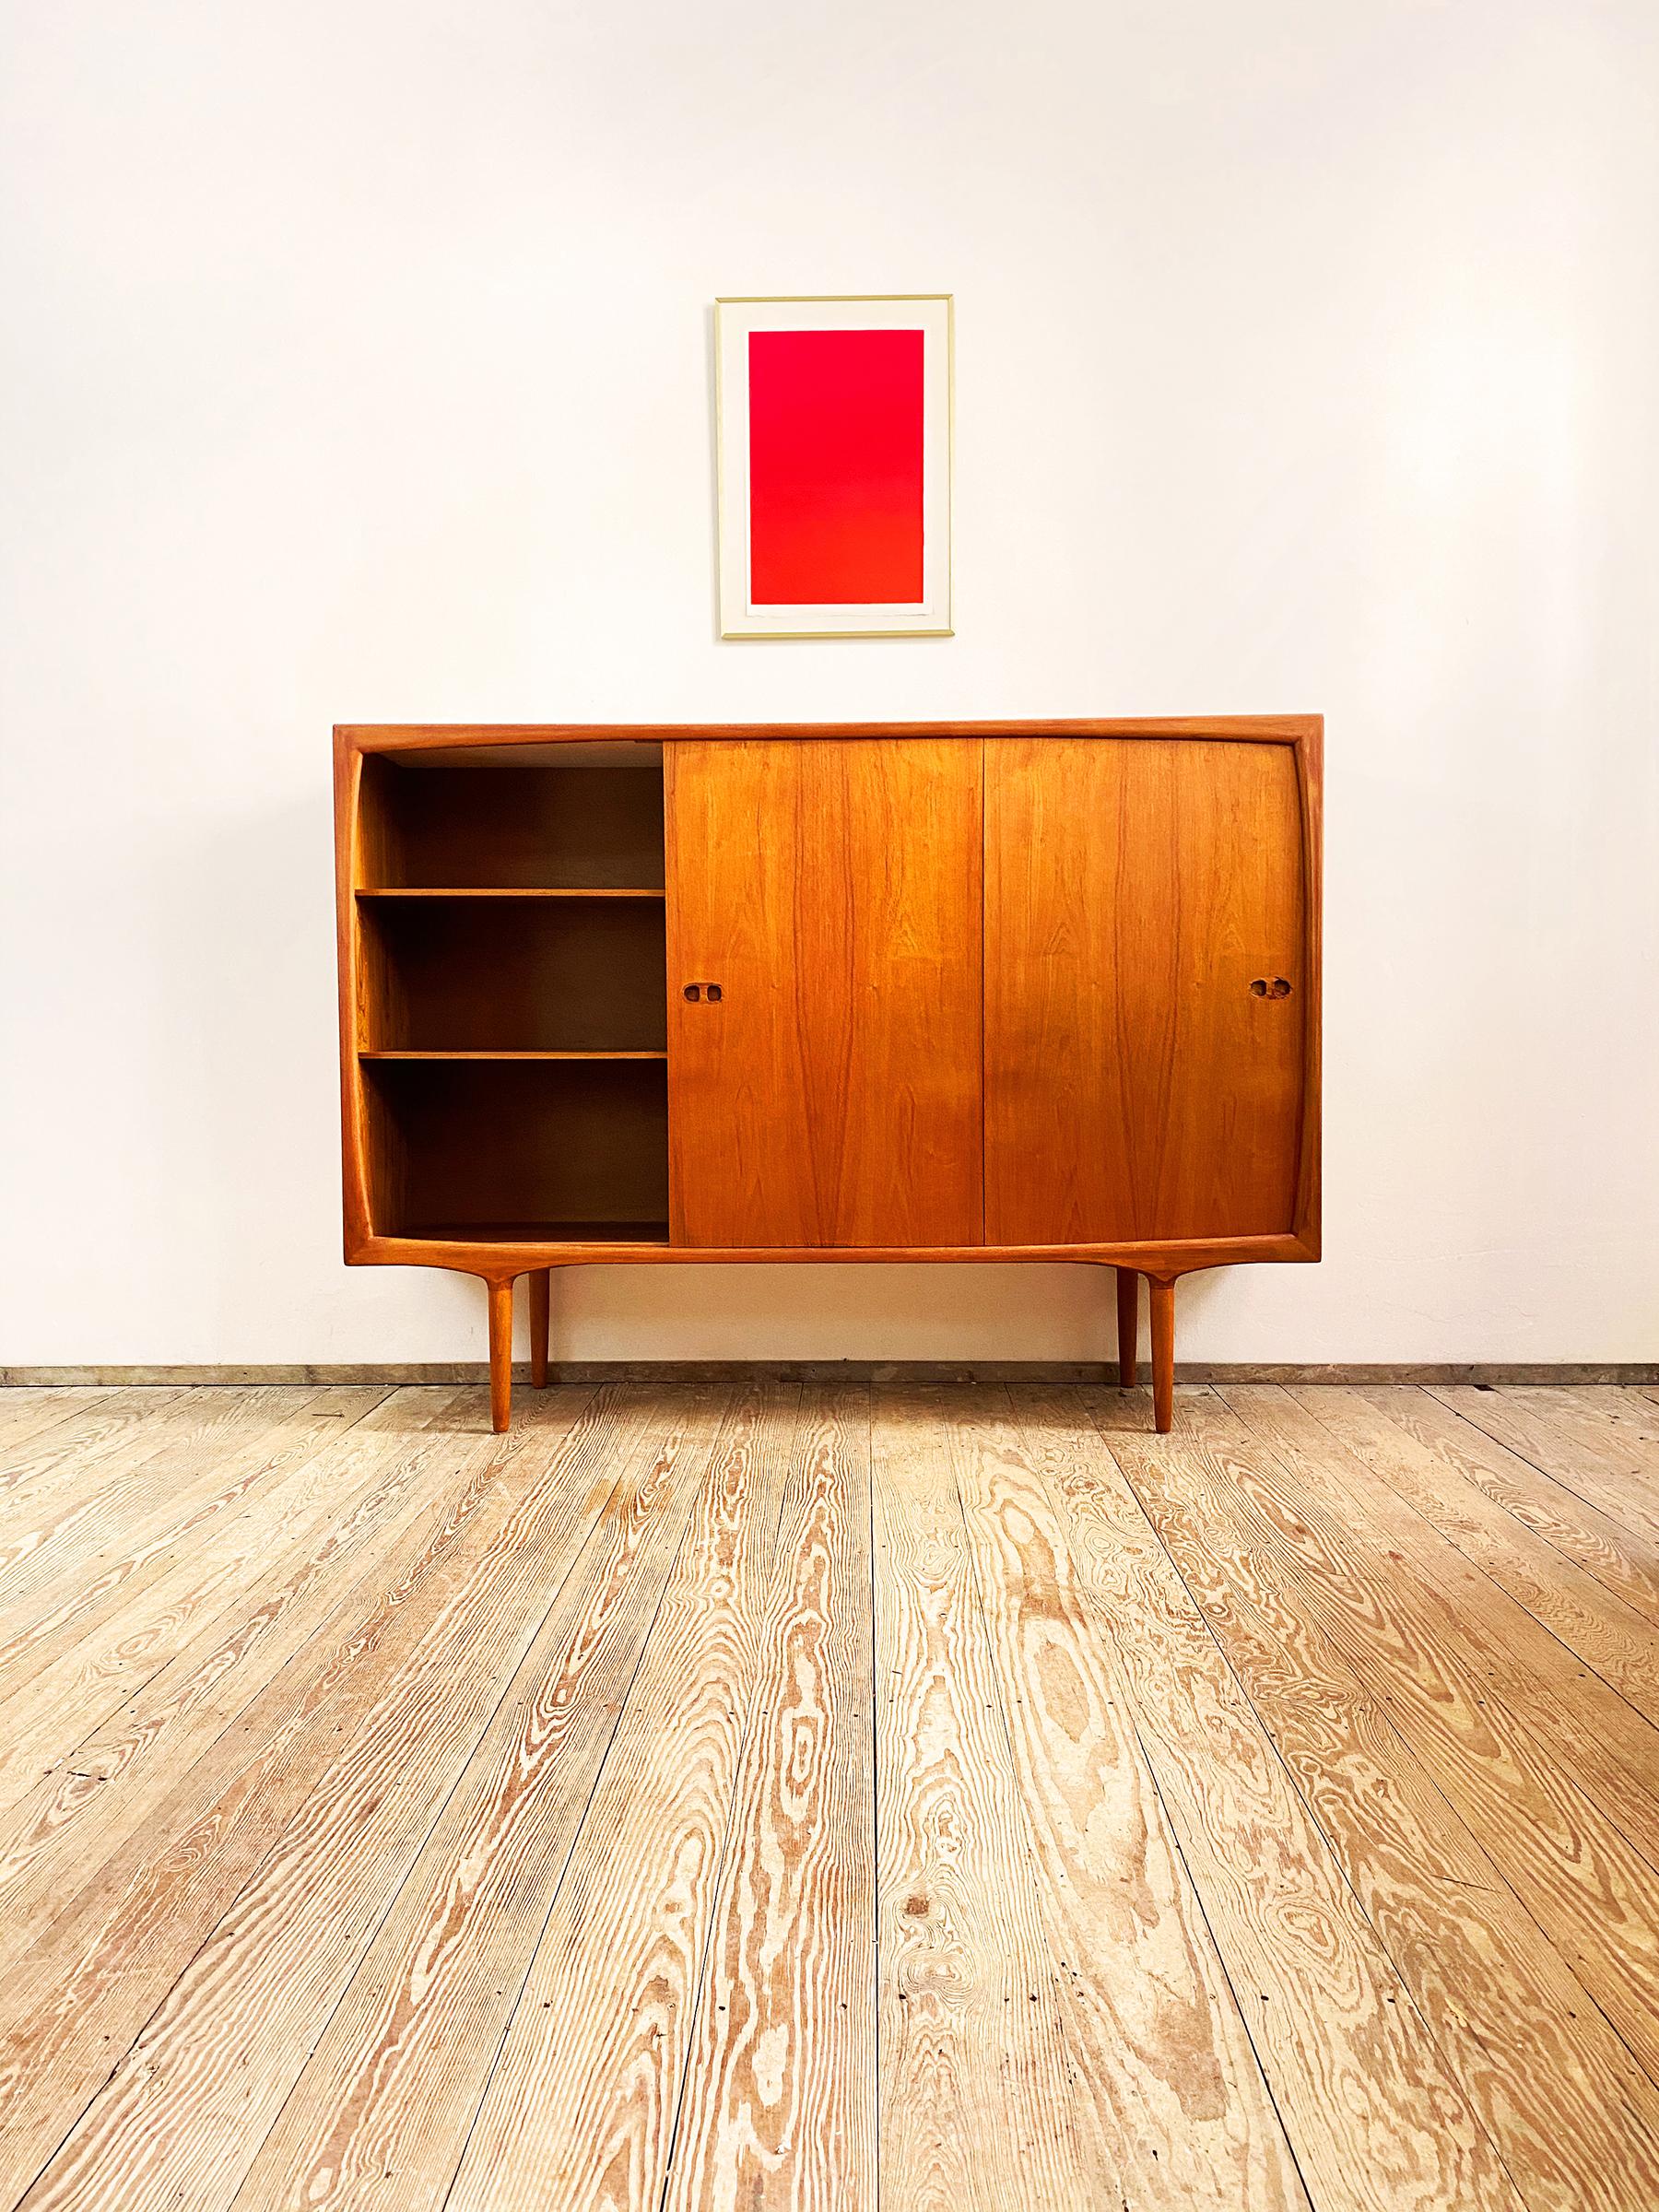 This Scandinavian Mid-Century Modern teak credenza was designed in the 1950s by Harry Østergaard for Randers Møbelfabrik in Denmark.

It shows exquisite Danish craftsmanship and offers plenty of storage space on four tapered legs and lots of